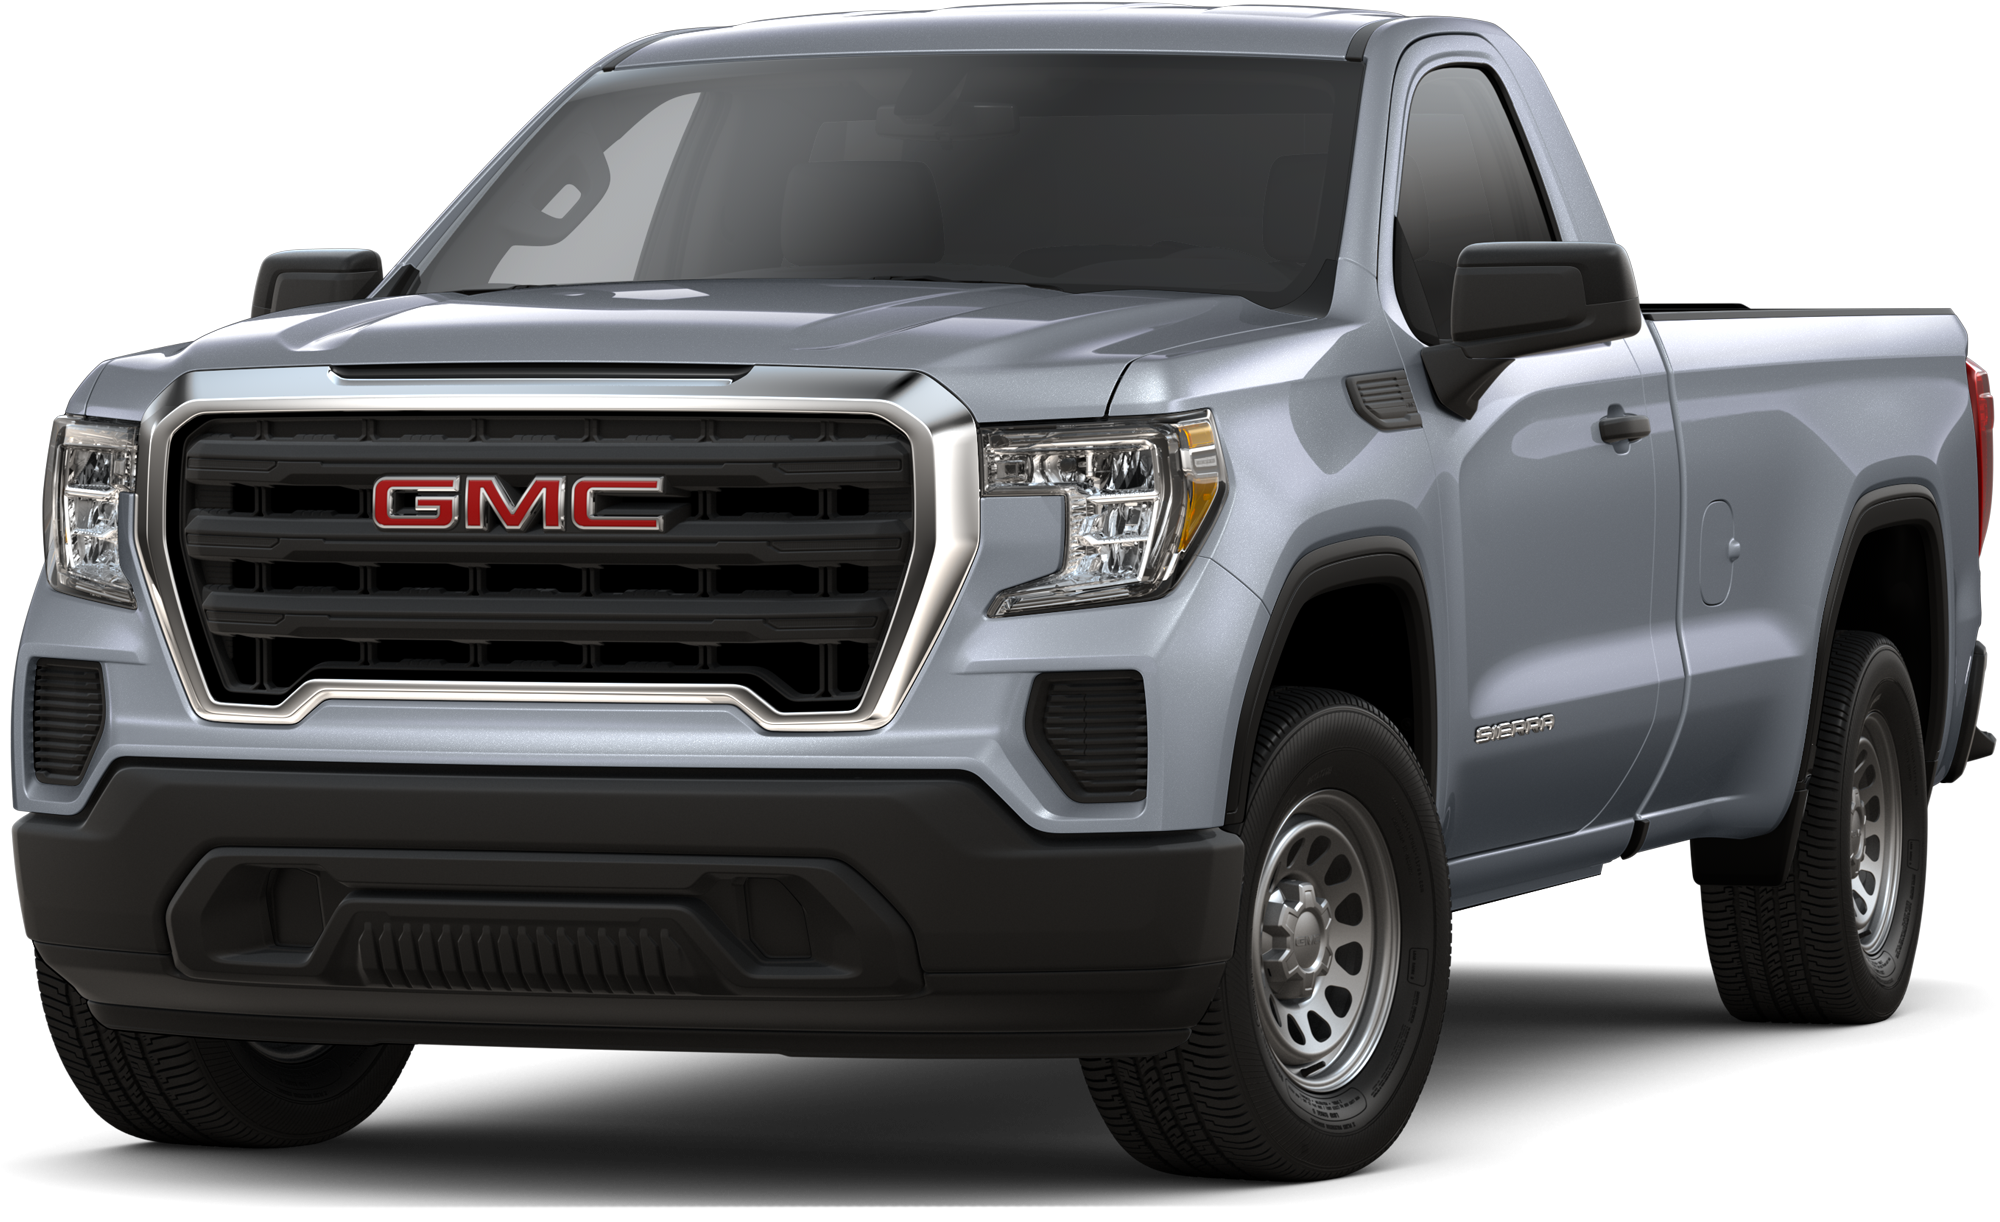 2021 Gmc Sierra 1500 Incentives Specials Offers In Saco Me